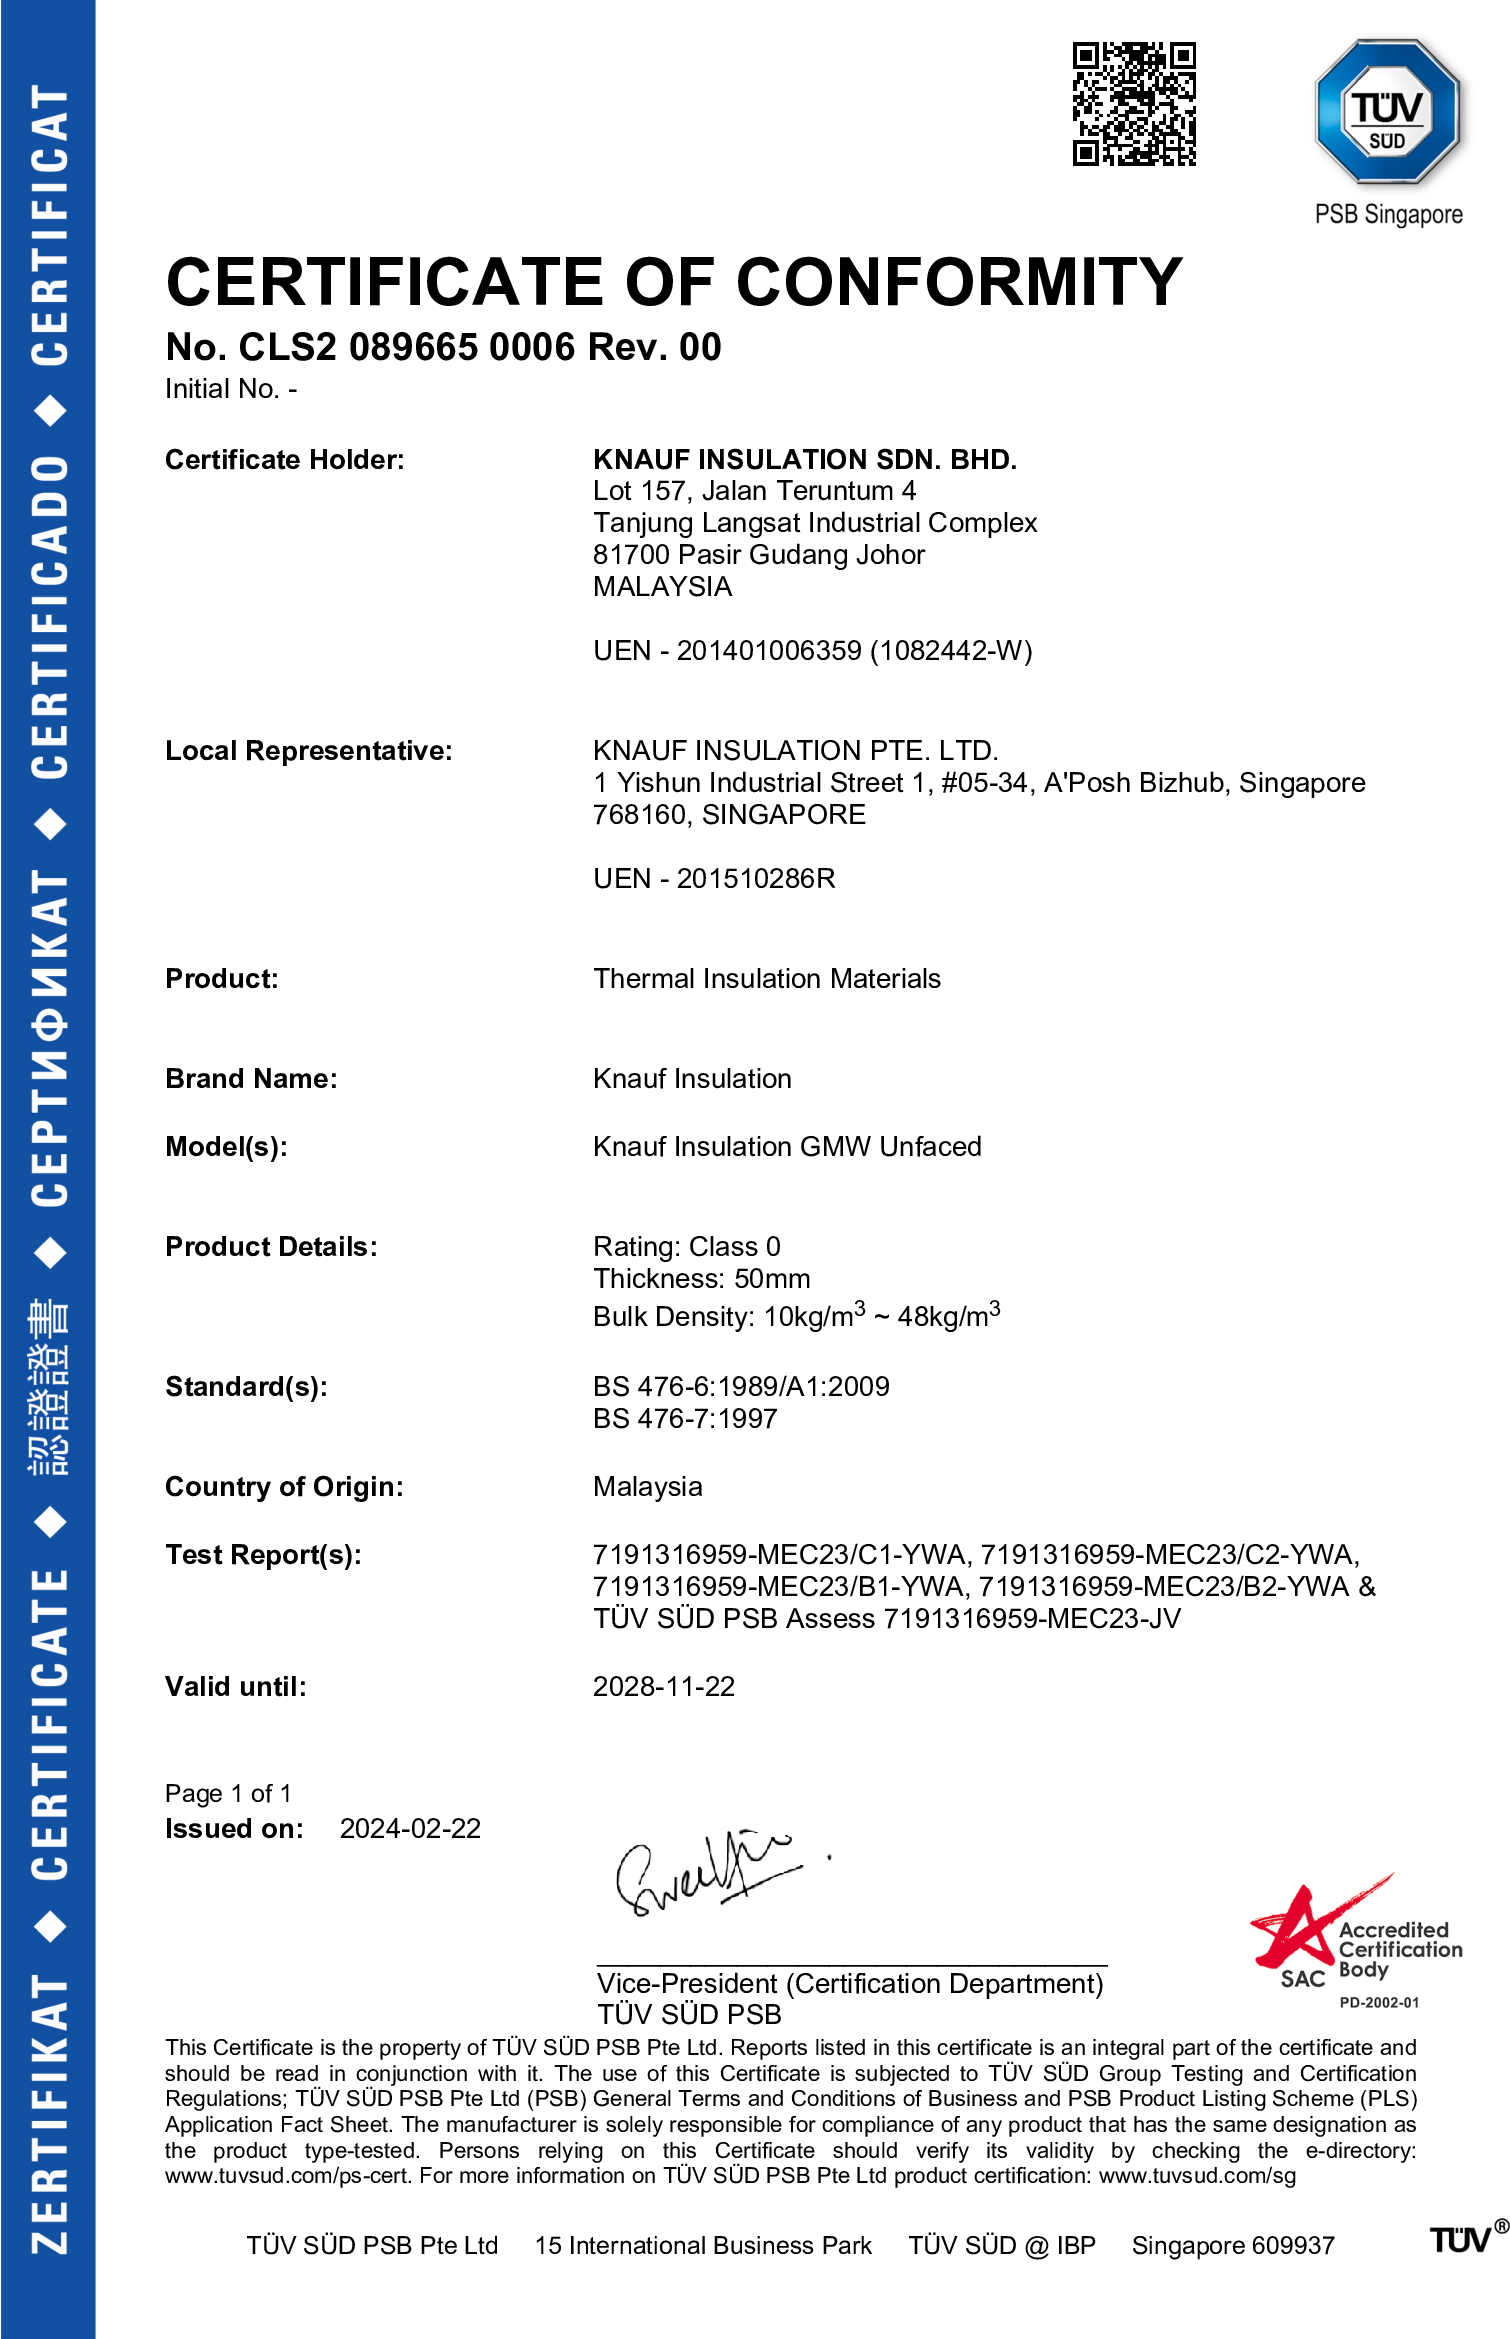 Unfaced Glasswool - Certificate of Conformity – 10-48kg/m3_50mm_ BS476-Part 6 & 7